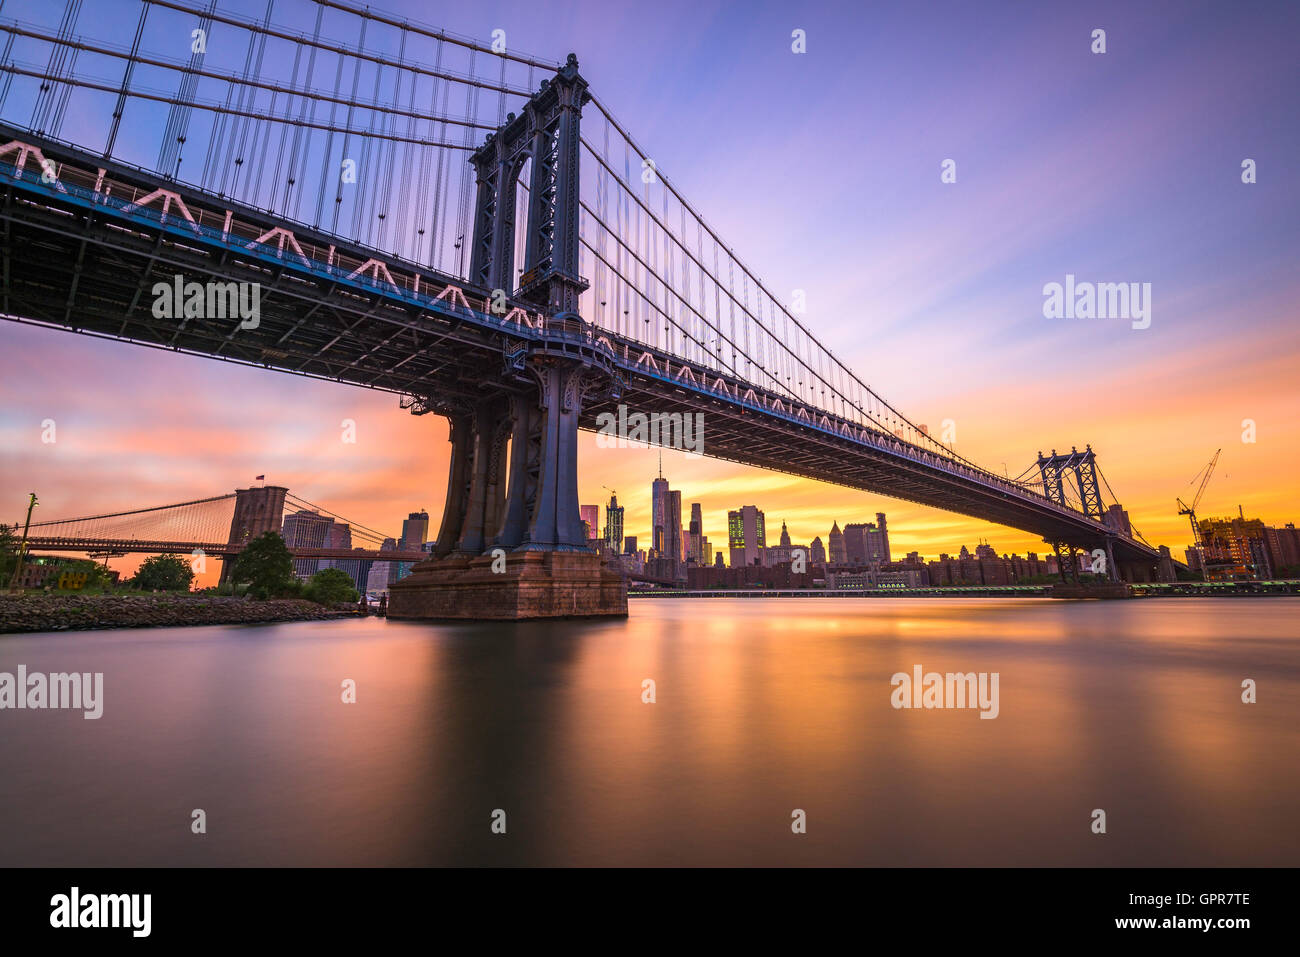 New York City at the Manhattan Bridge spanning the East River during sunset. Stock Photo